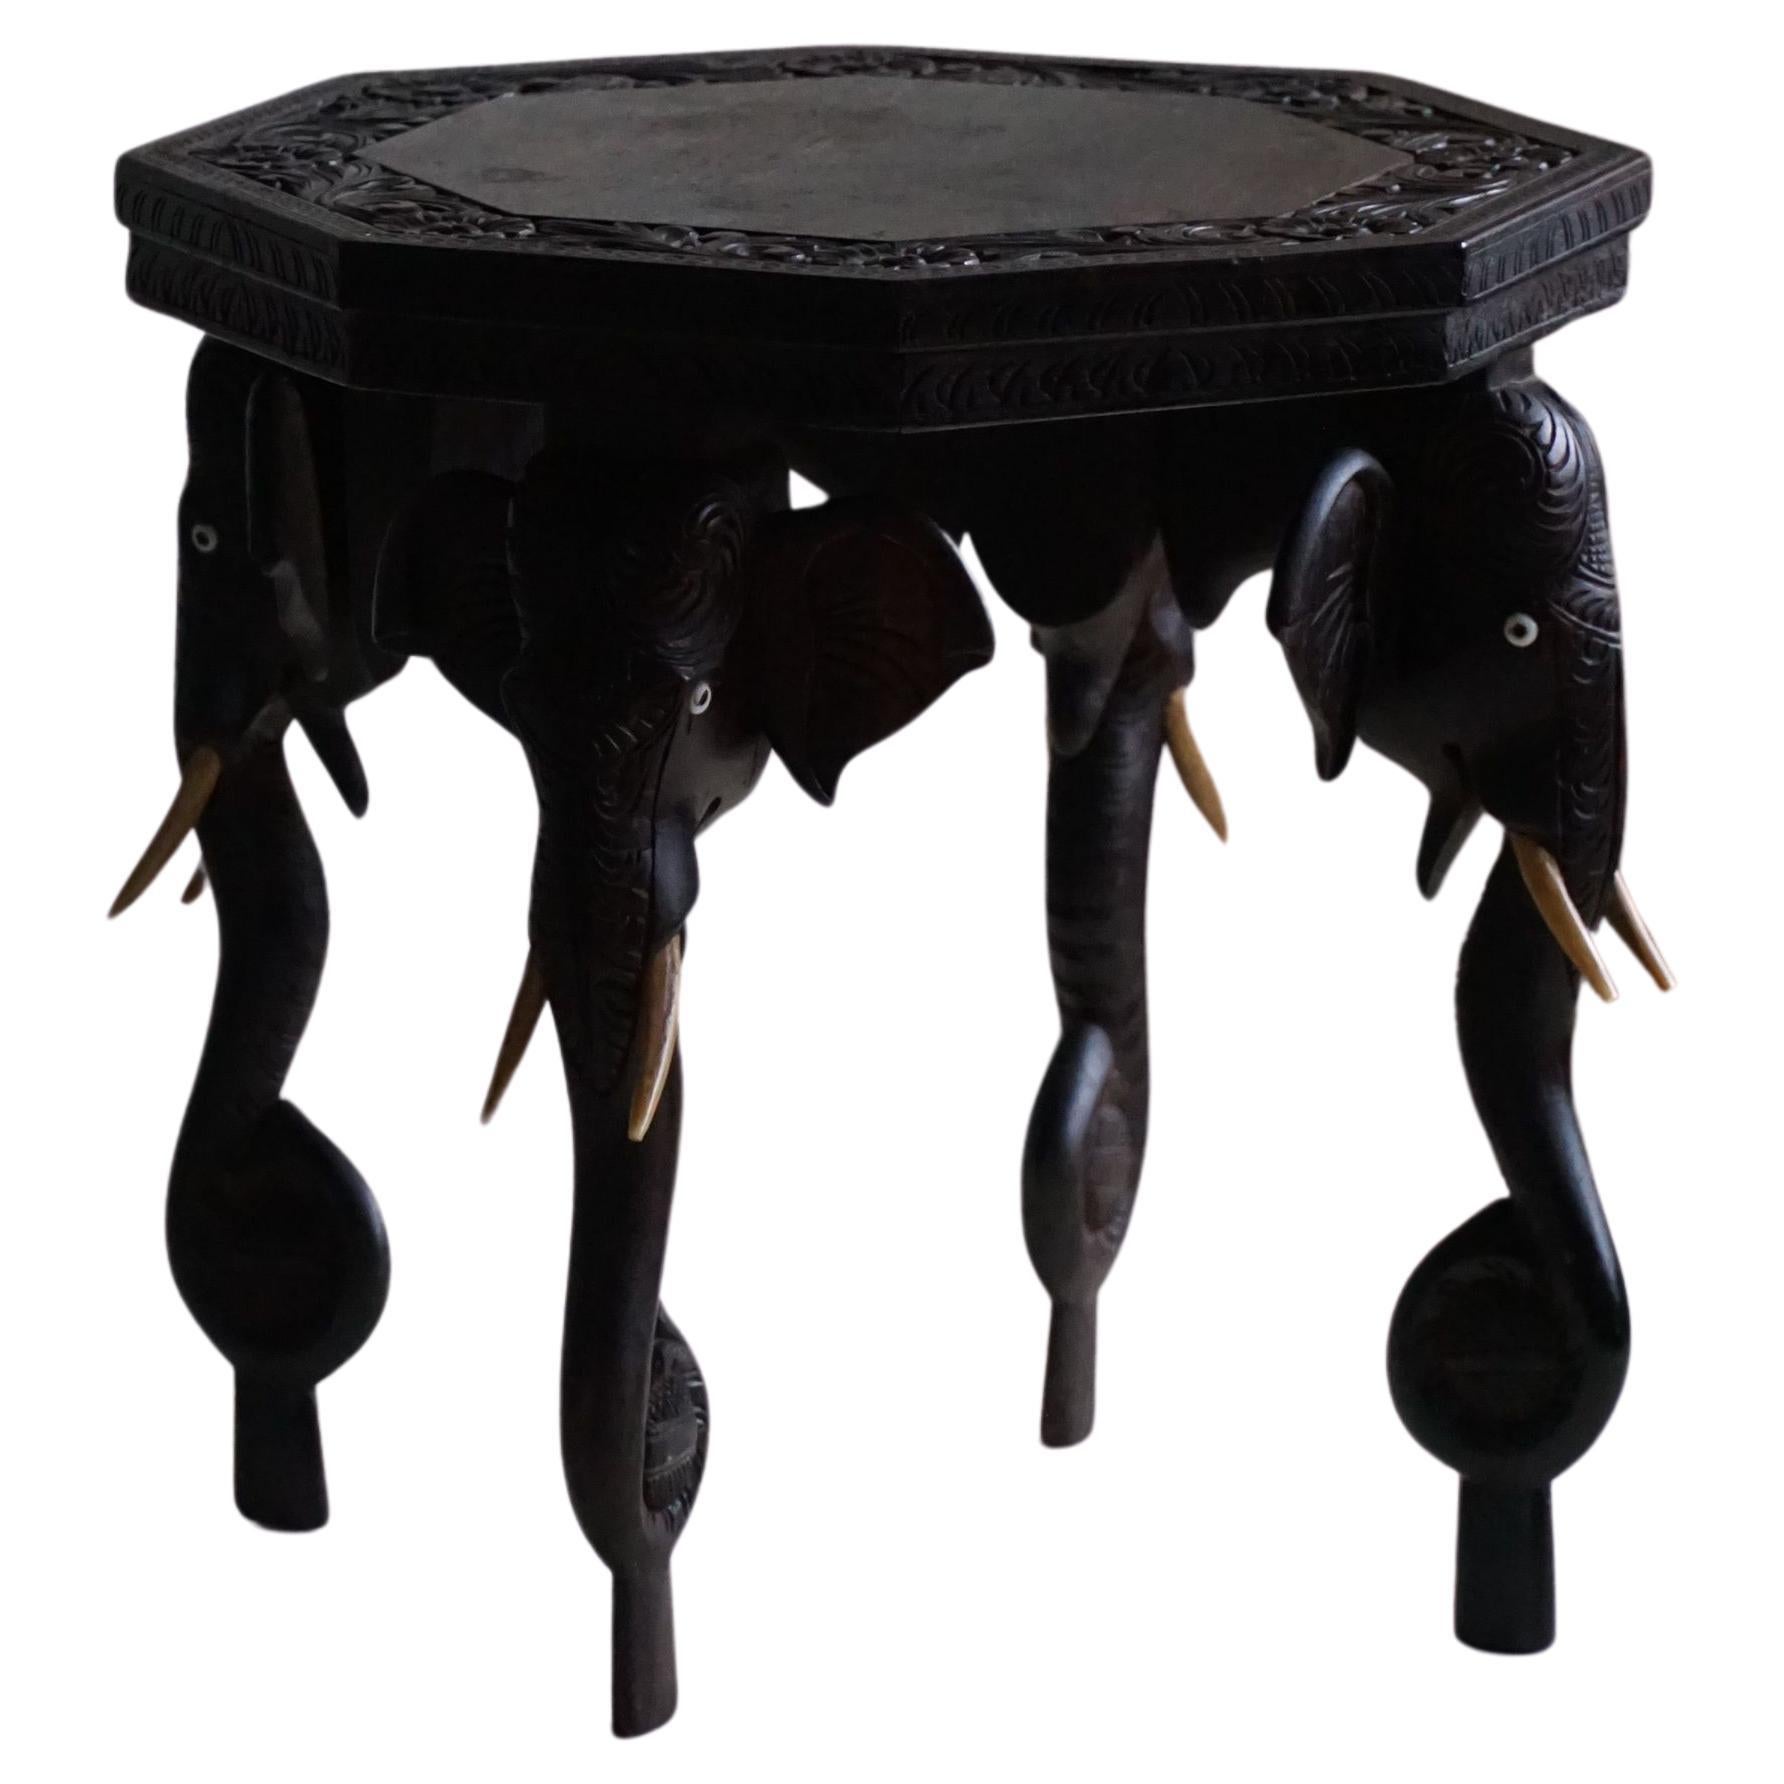 Hardwood Side Table with 4 Elephant Head Legs, Anglo Indian, 1920s For Sale